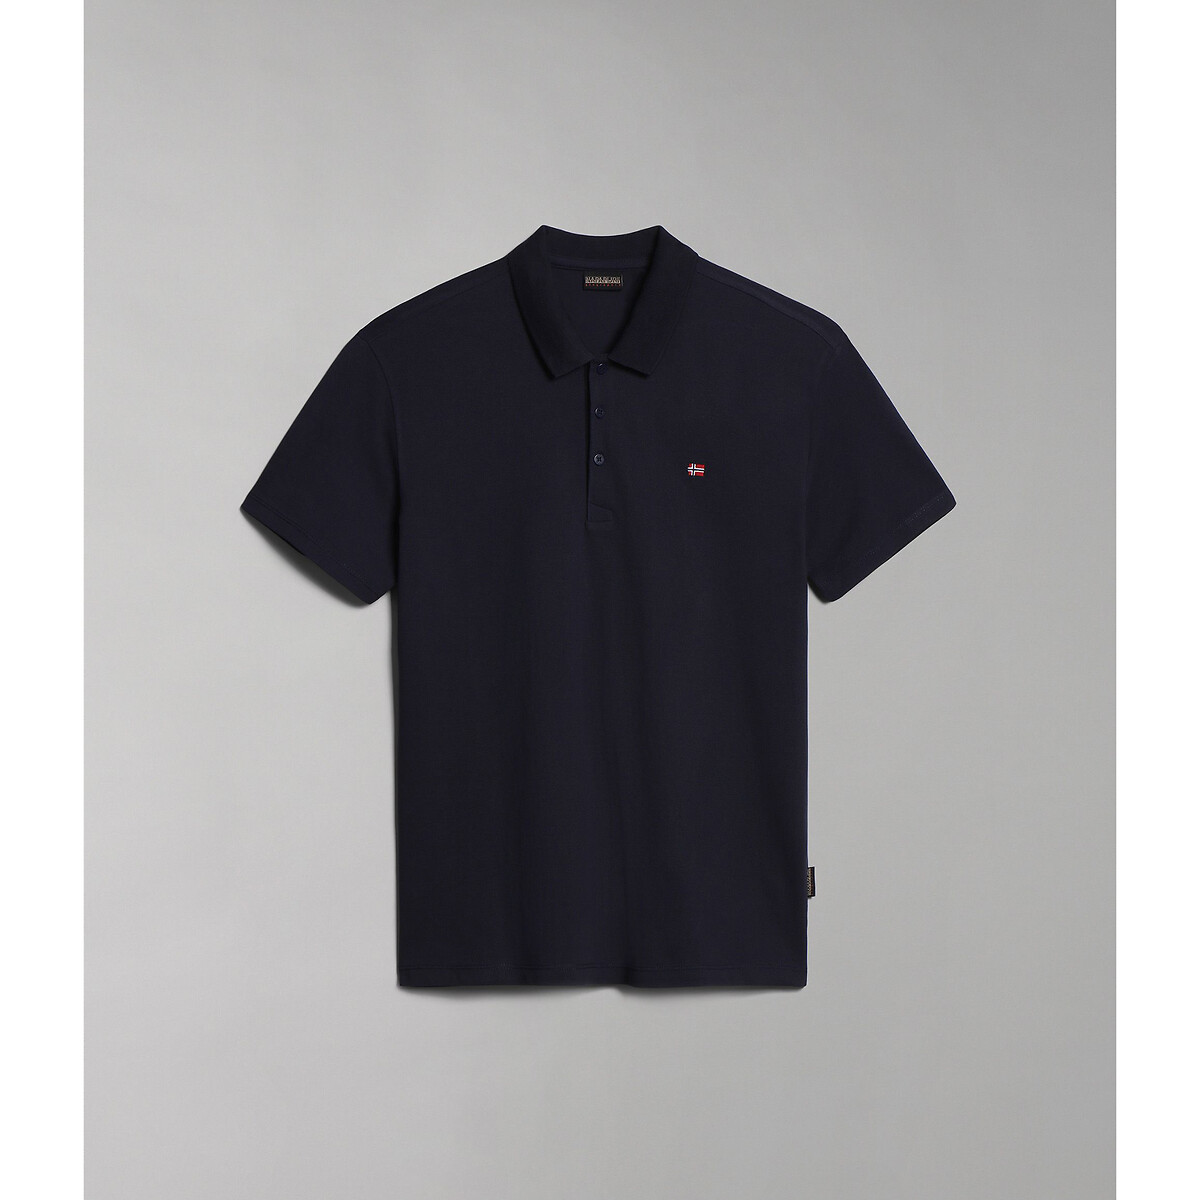 Ealis Cotton Polo Shirt with Short Sleeves